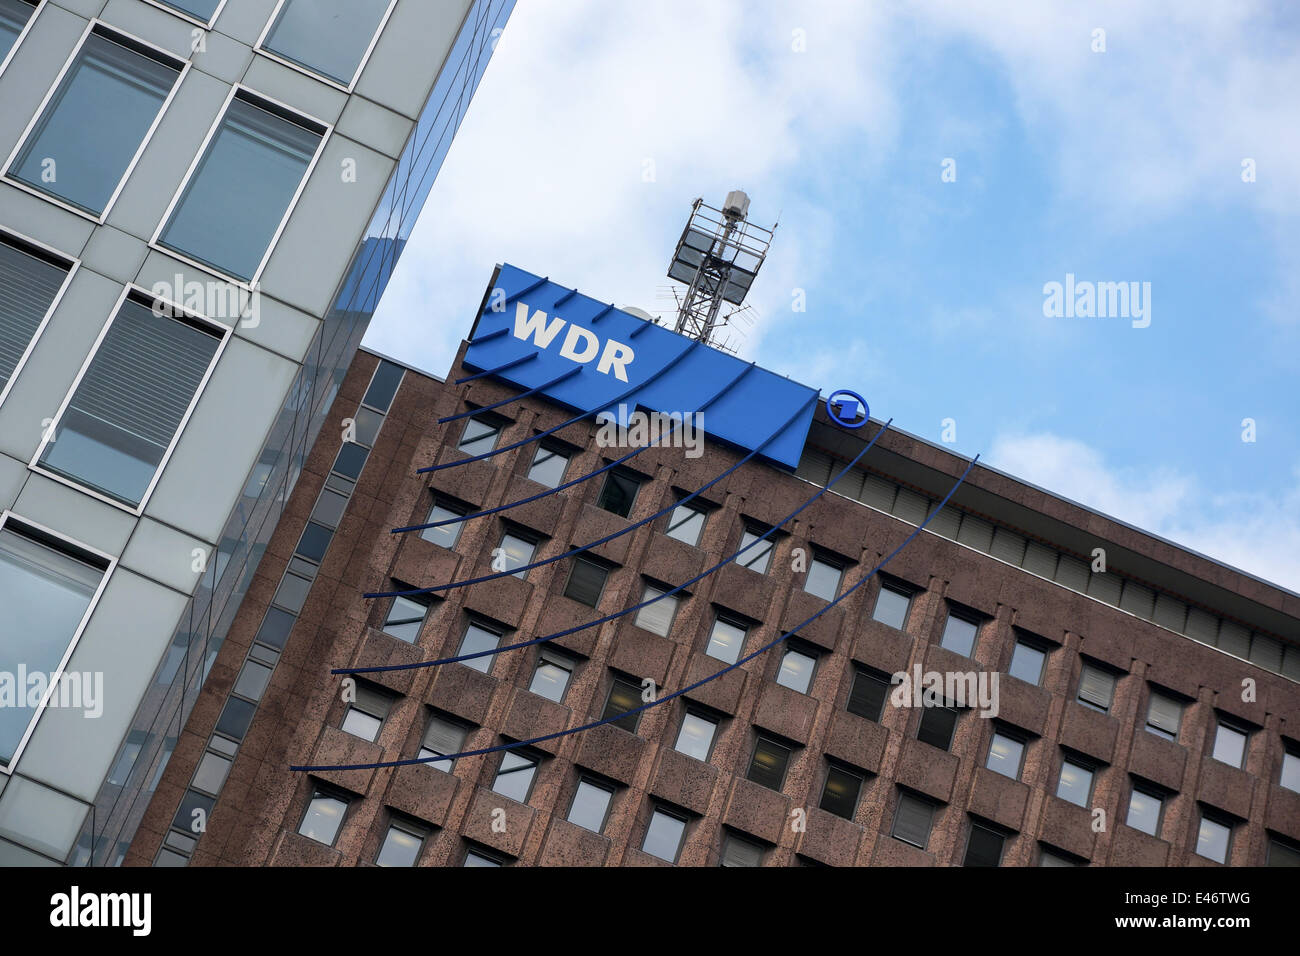 Germany: WDR head quaters (West German Broadcasting), Cologne. Photo from 23 September 2013. Stock Photo